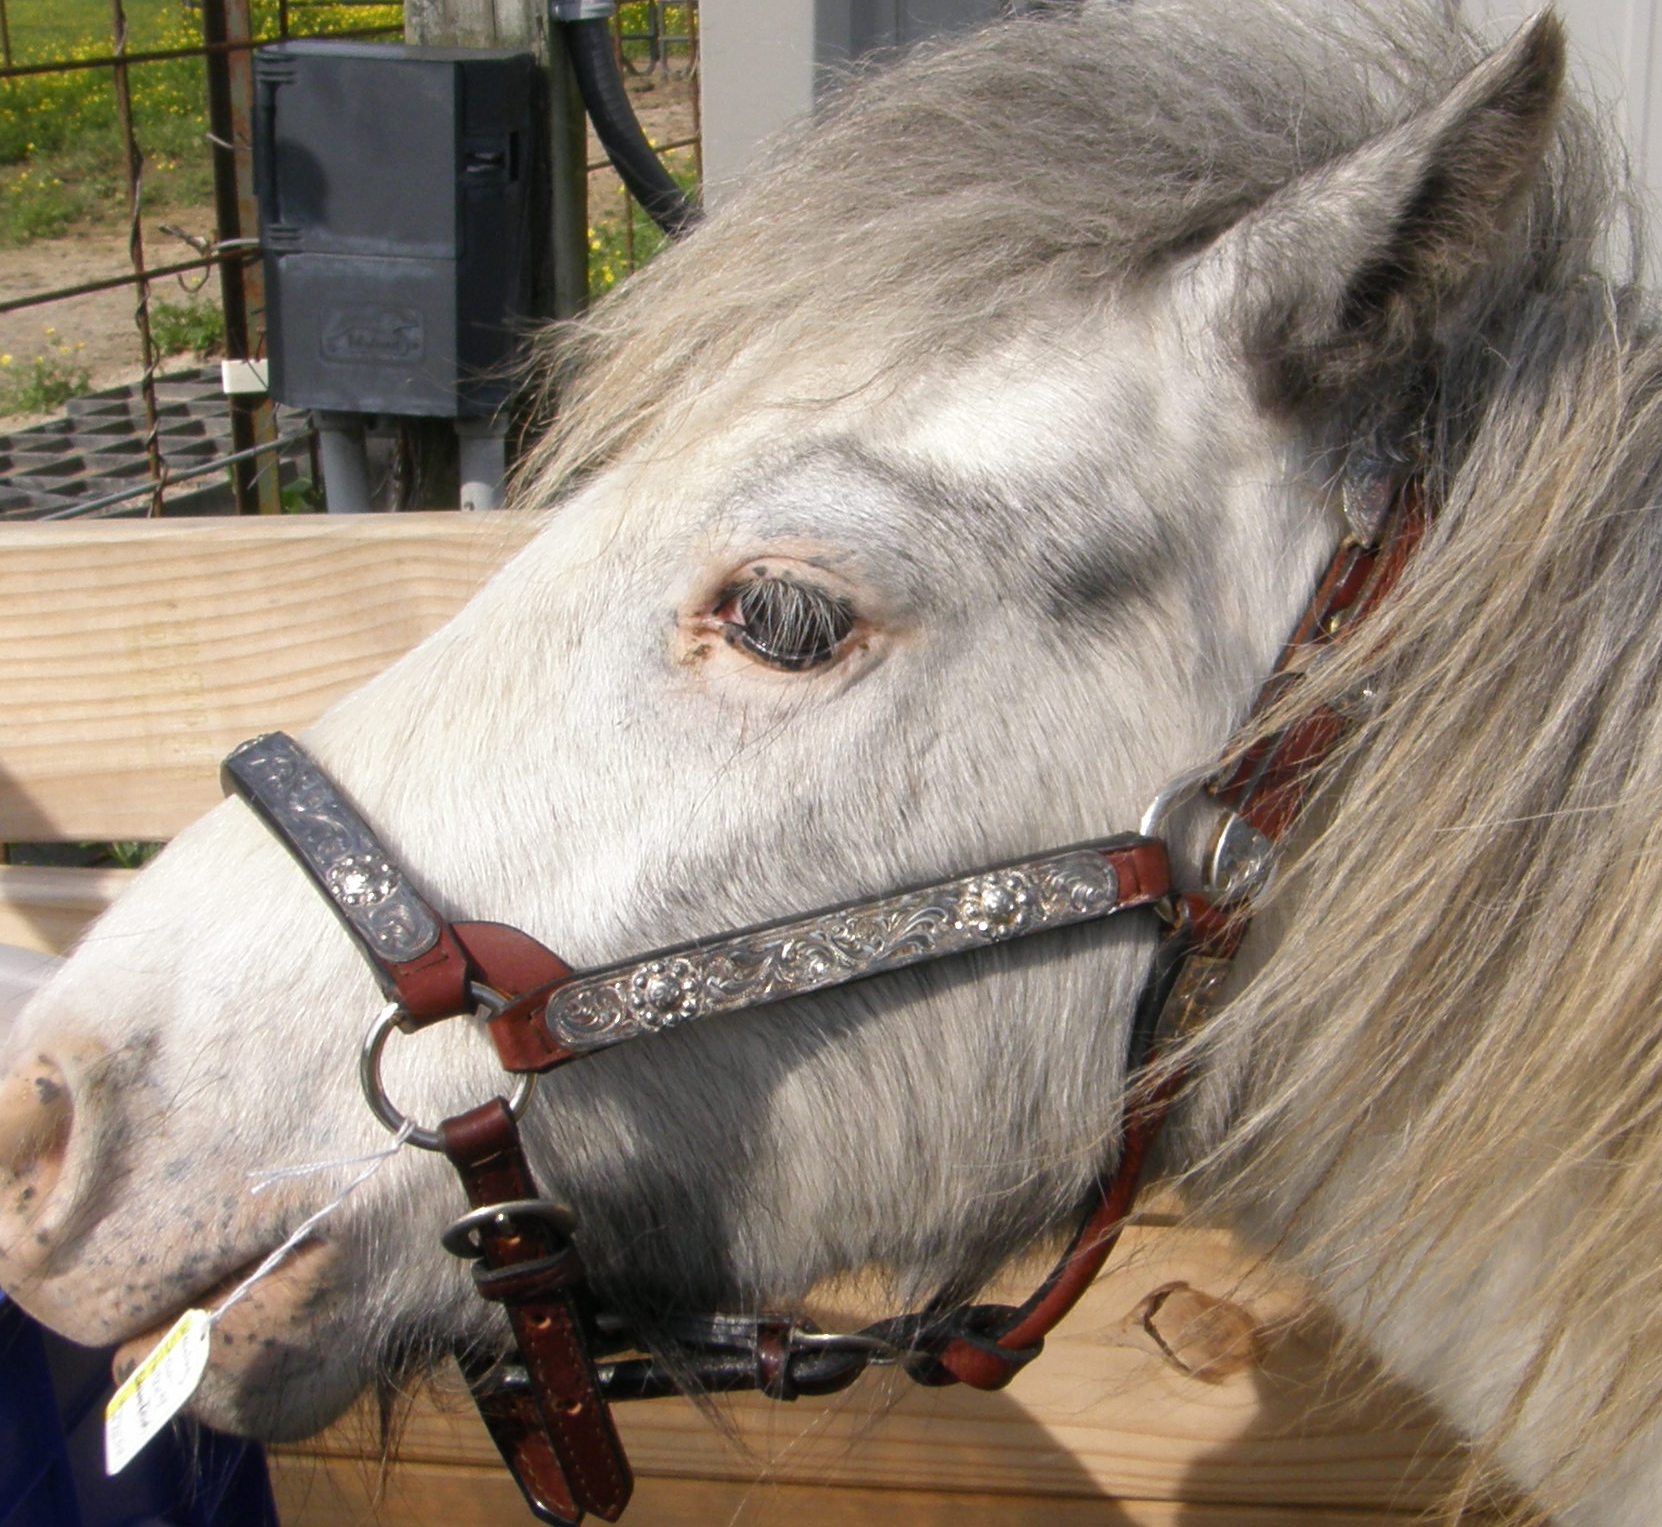 Dale Chavez Western Show Halter Stock Halter Weanling/Pony/Class B Mini Horse Silver Show Halter